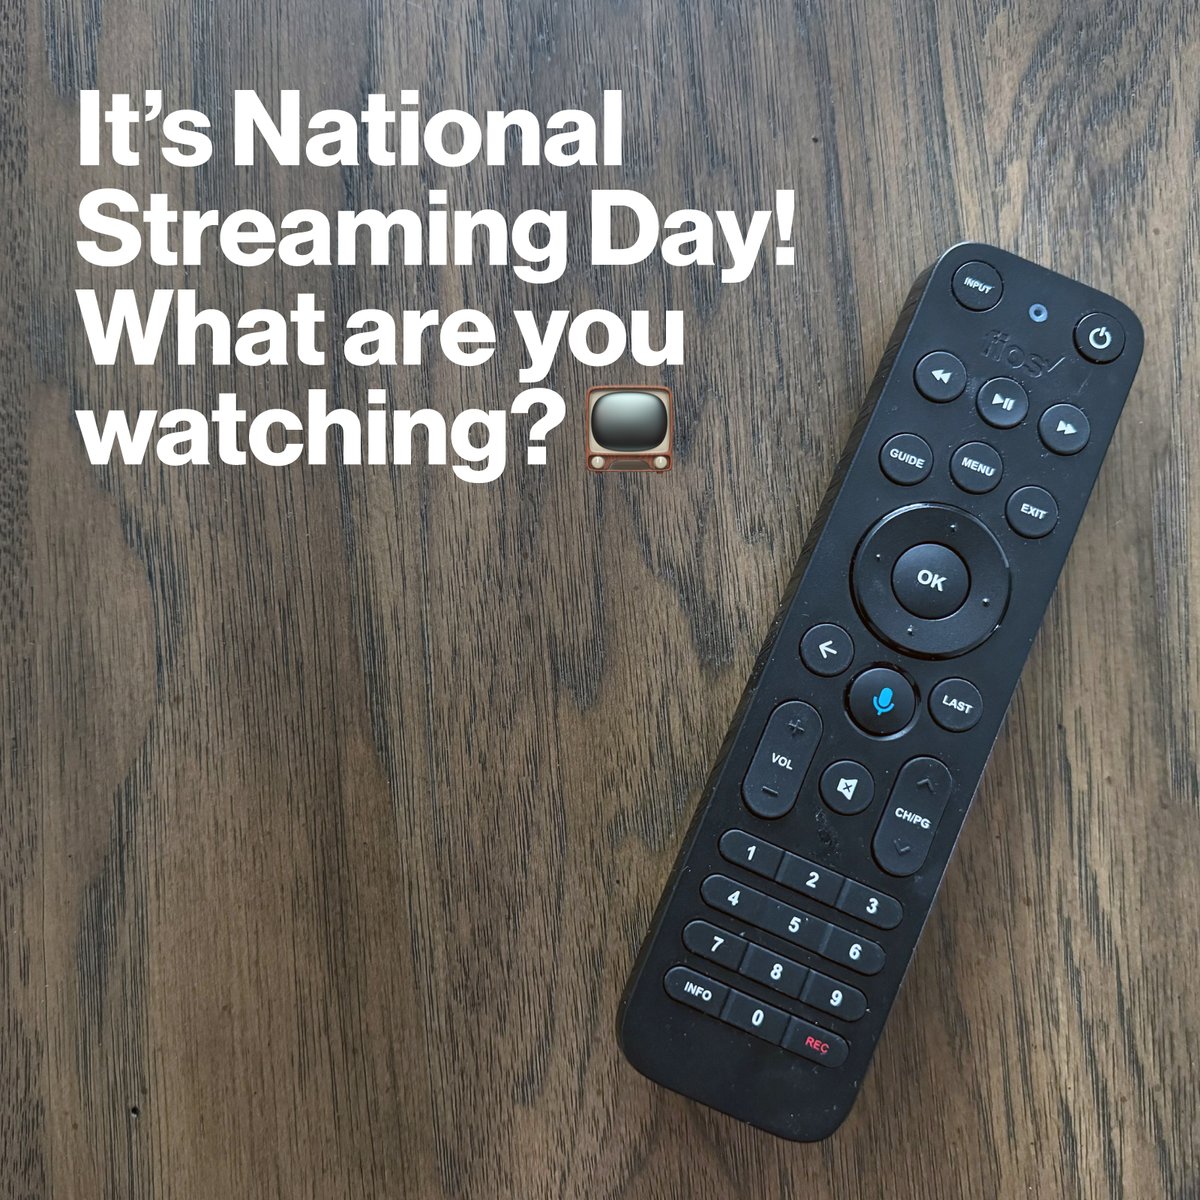 Today is #NationalStreamingDay! Whether you binge your favorite shows in one sitting, enjoy them over time or something in between, we want to hear about it. Let us know in the comments what you’re currently watching 👇